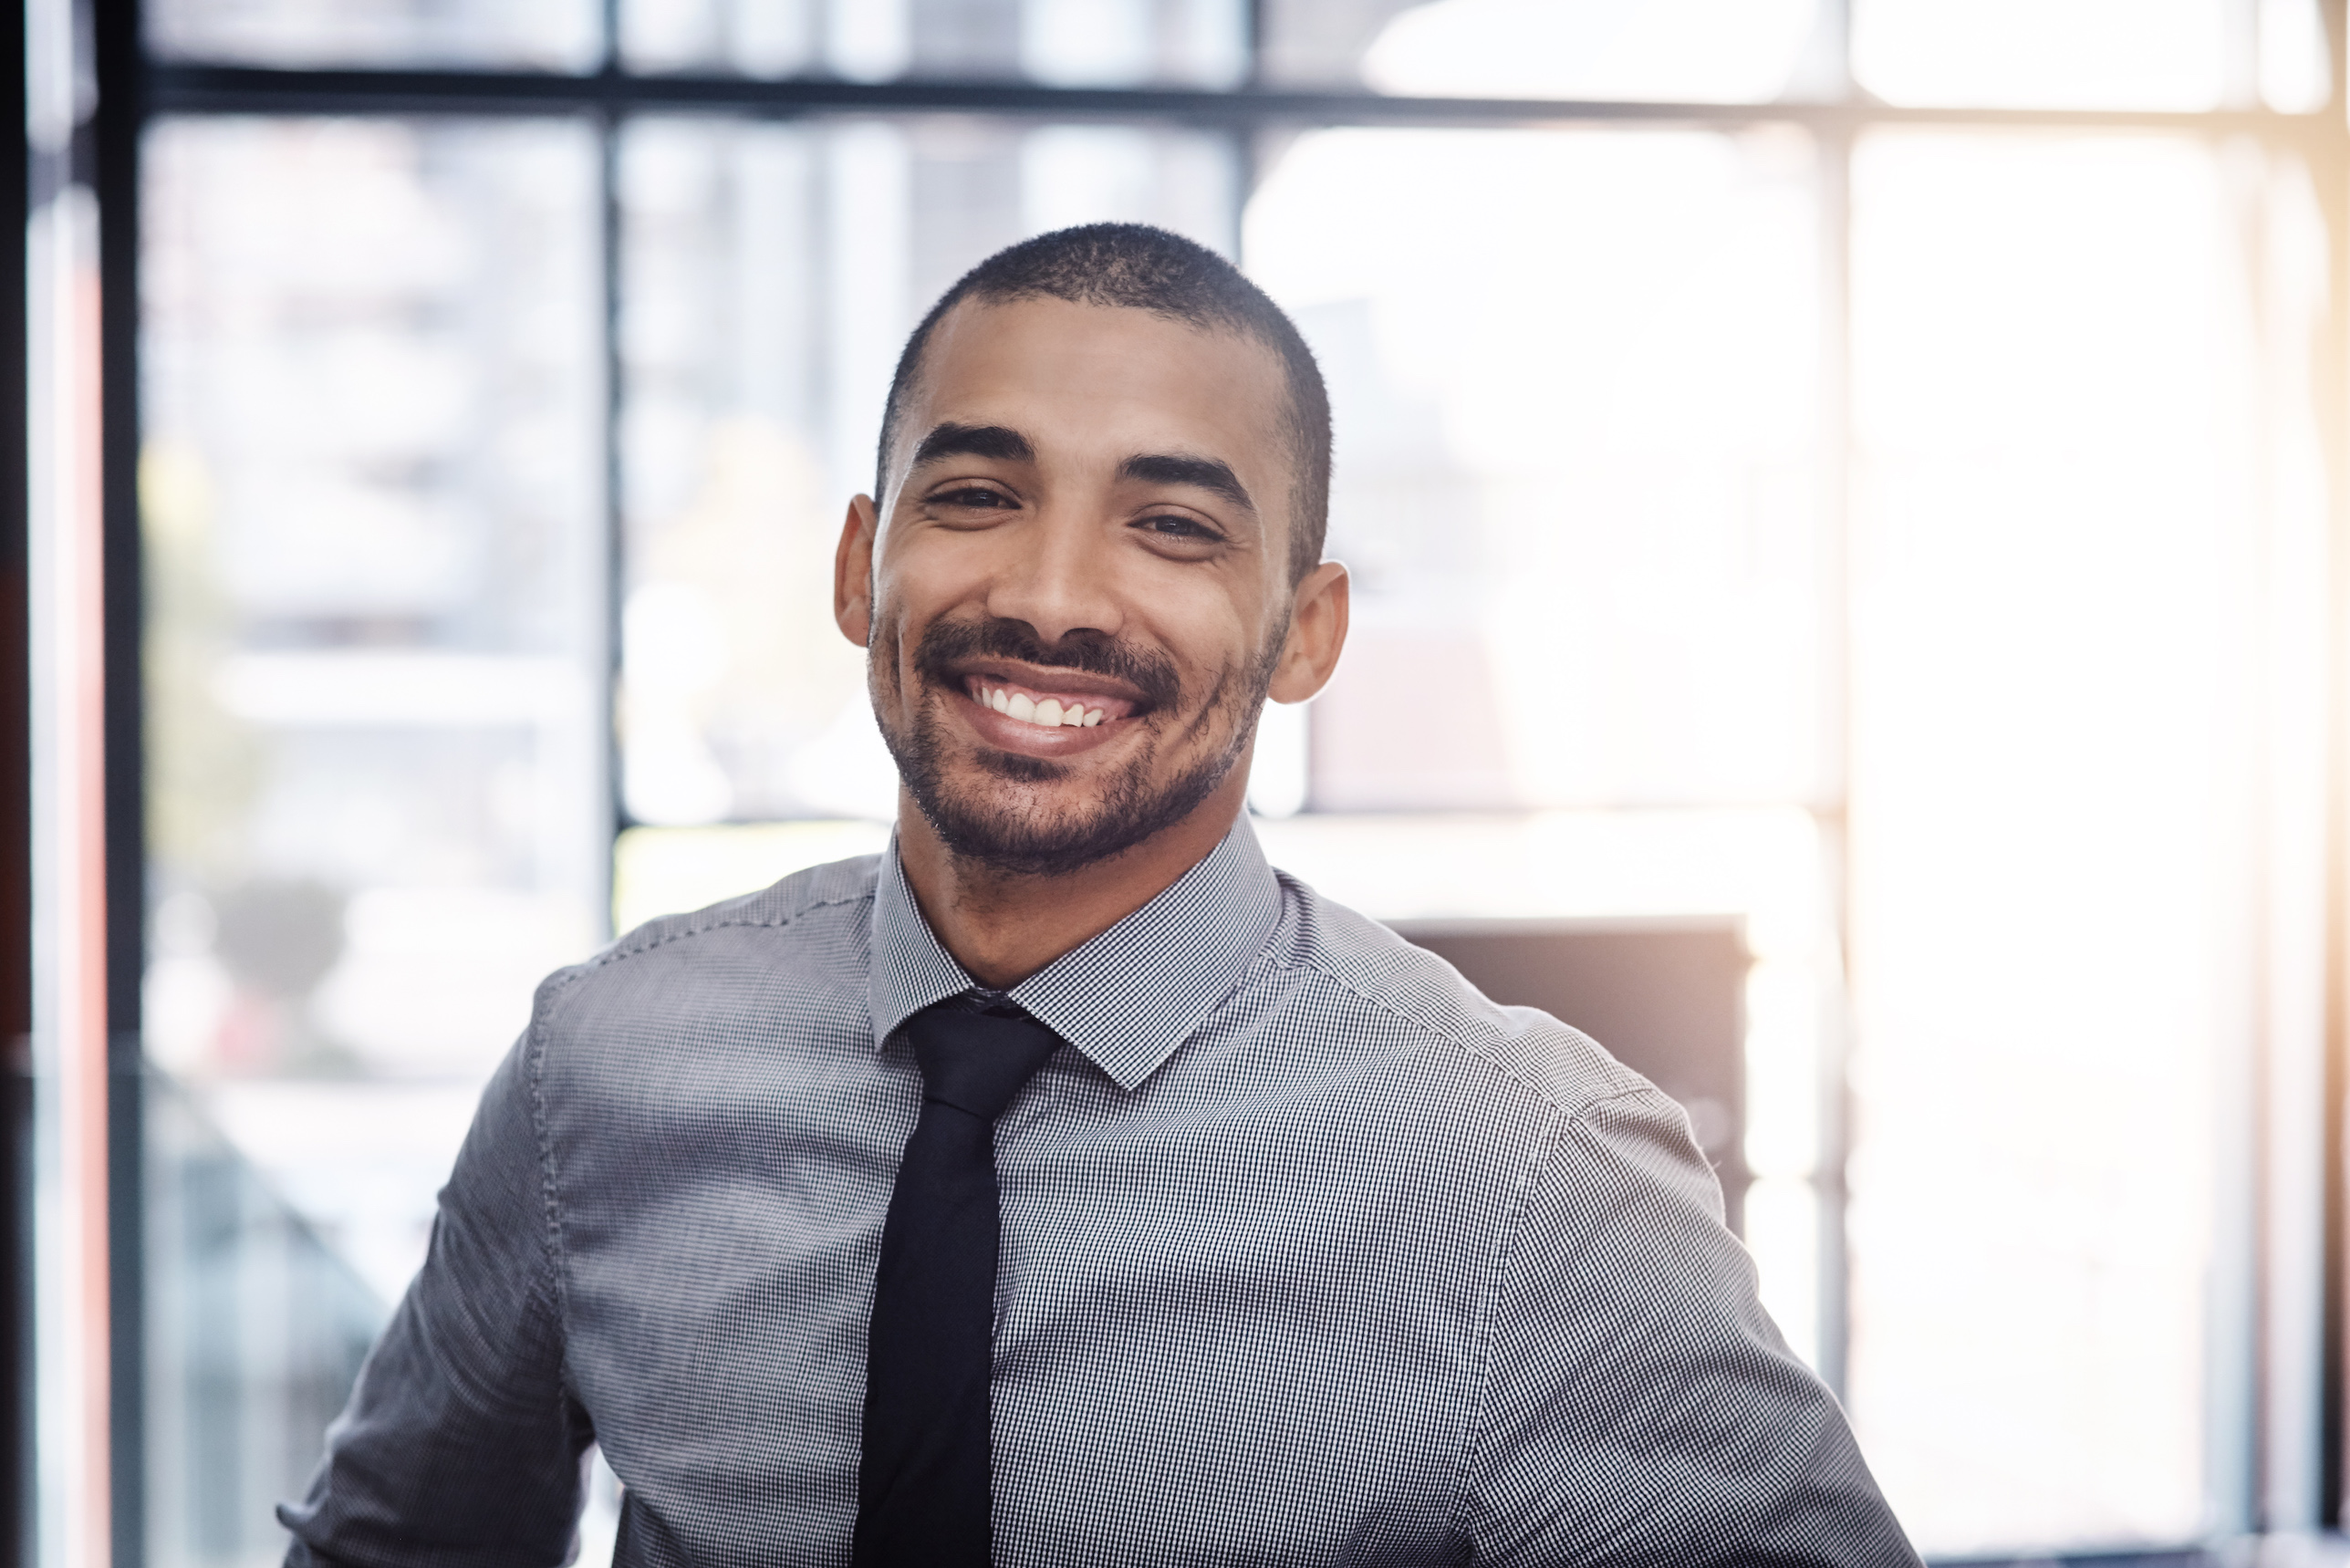 Man smiling in business setting